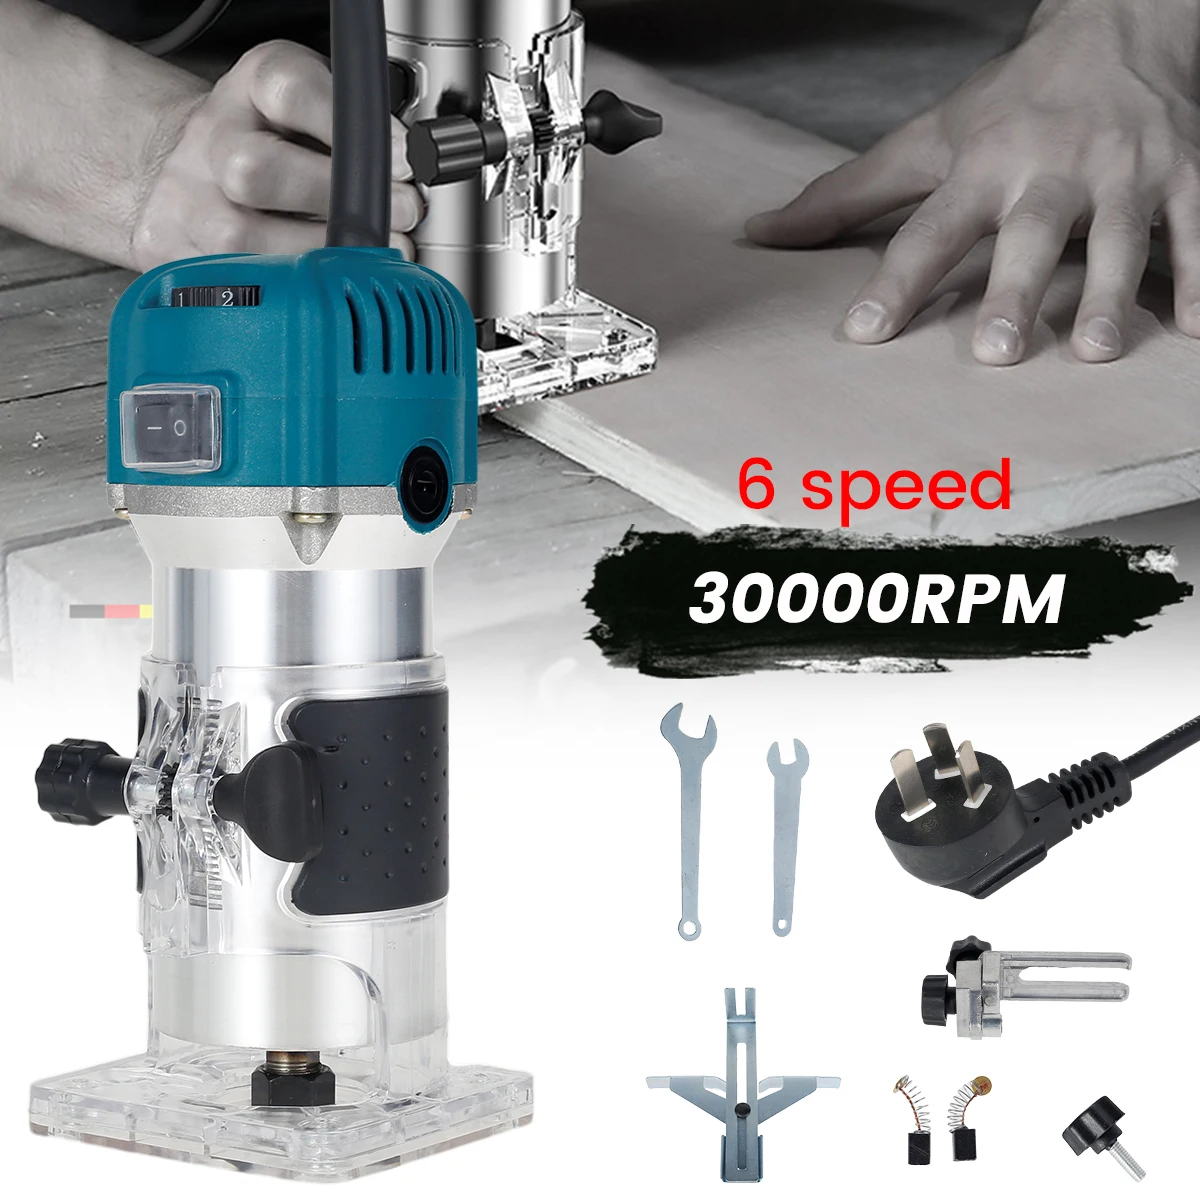 

800W Wood Router Tool Woodworking Electric Trimmer 30000RPM 6 Variable Speed Wood Milling Engraving Slotting Trimming Machine